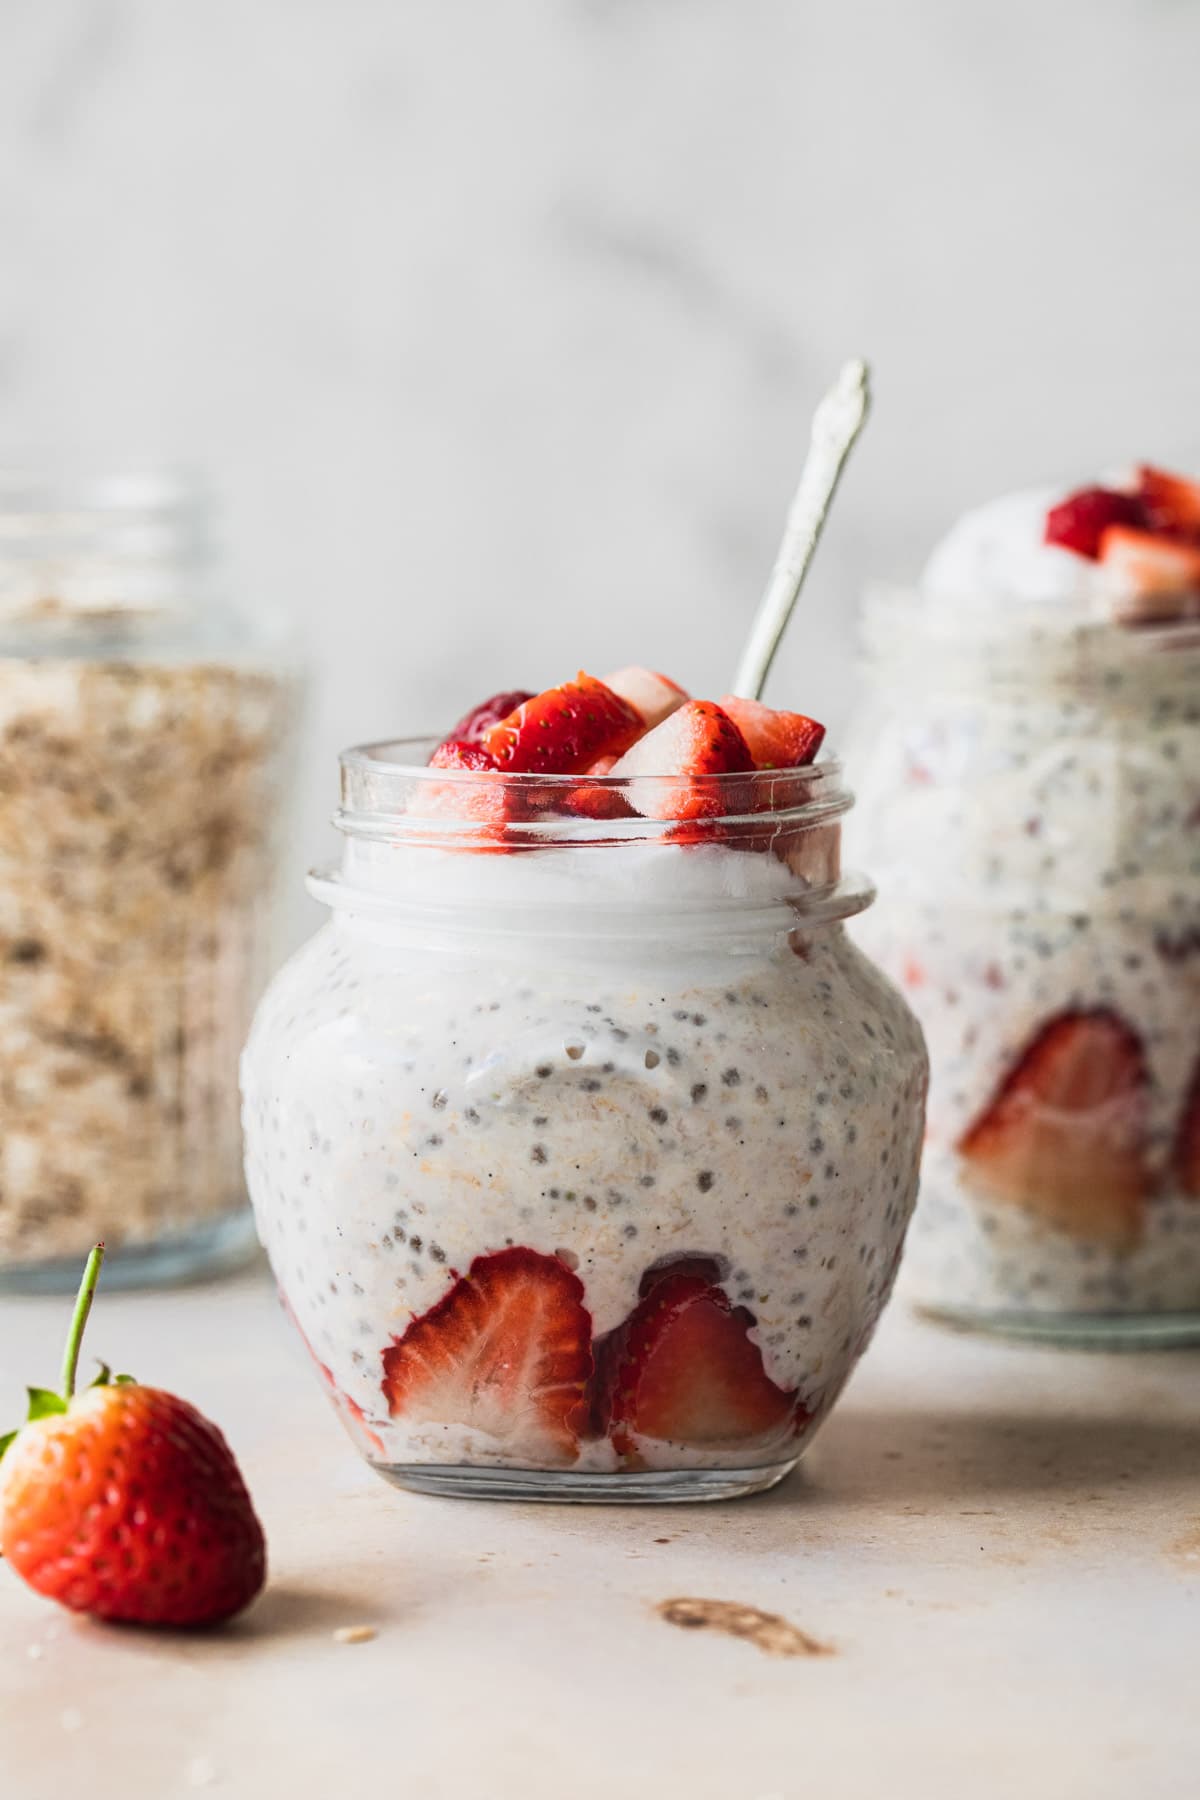 strawberry overnight oats in a small jar, with rolled oats in a jar in the background